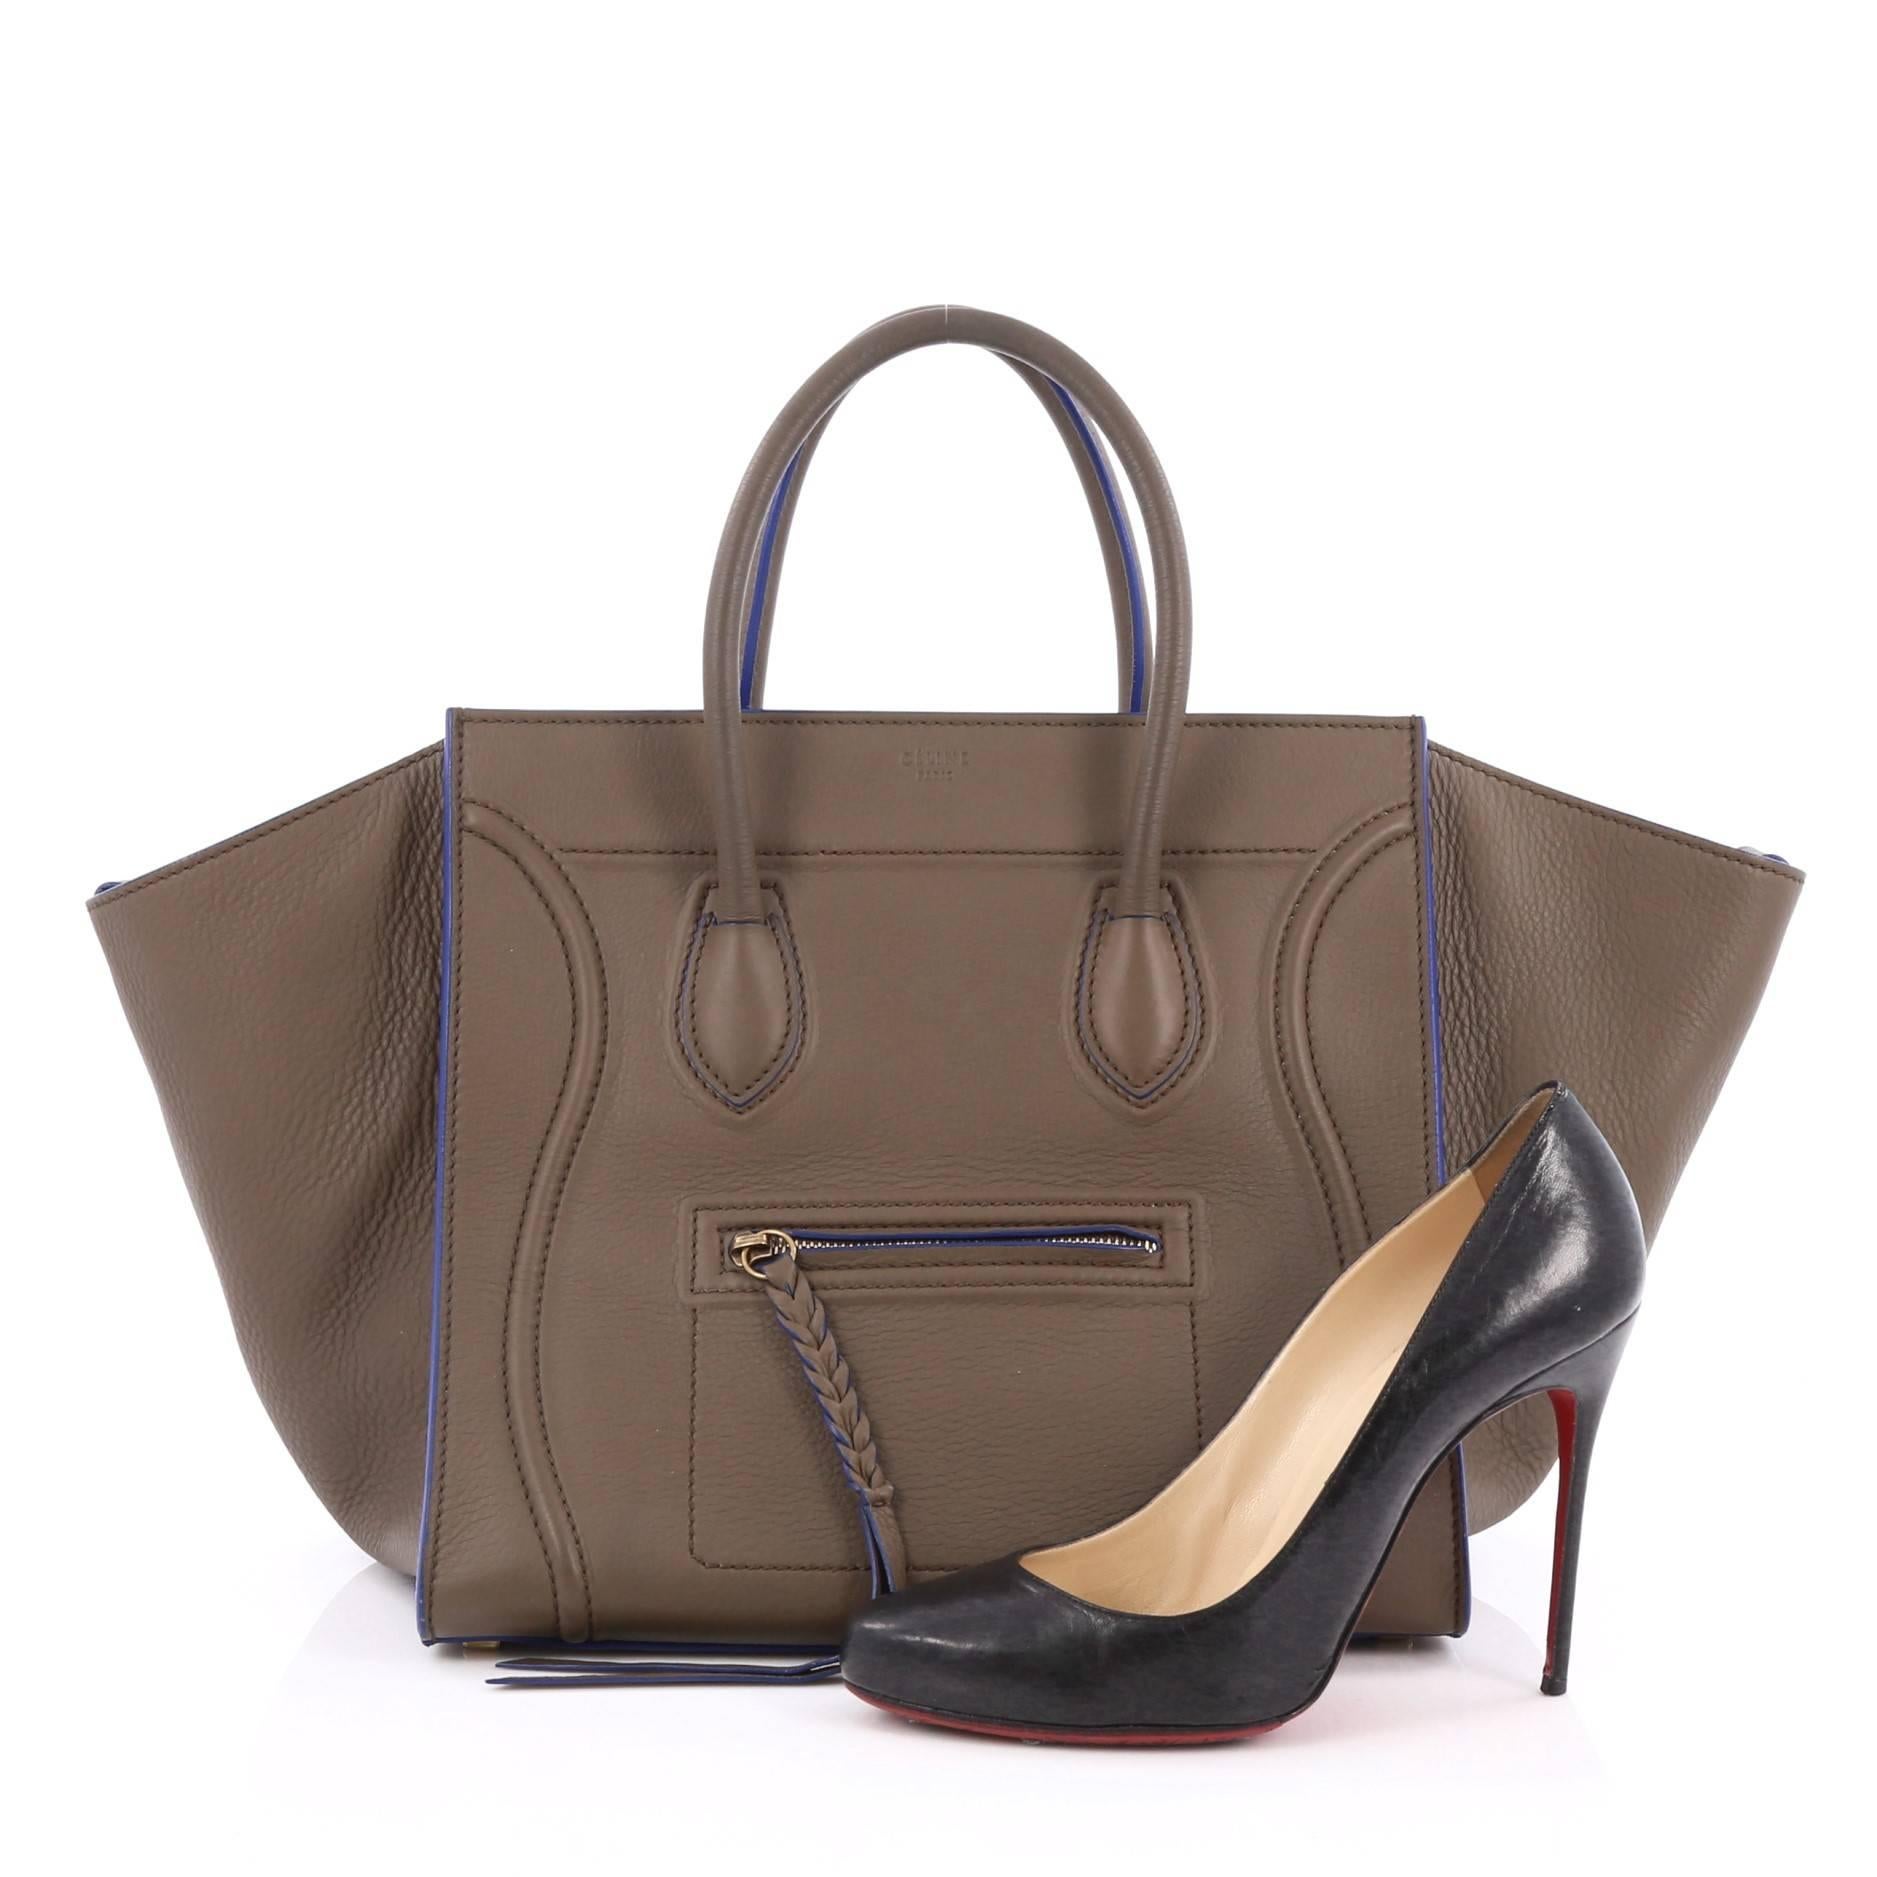 This authentic Celine Phantom Handbag Grainy Leather Medium is one of the most sought-after bags beloved by fashionistas. Crafted from olive green grainy leather with blue piping, this minimalist tote features dual-rolled handles, an exterior front